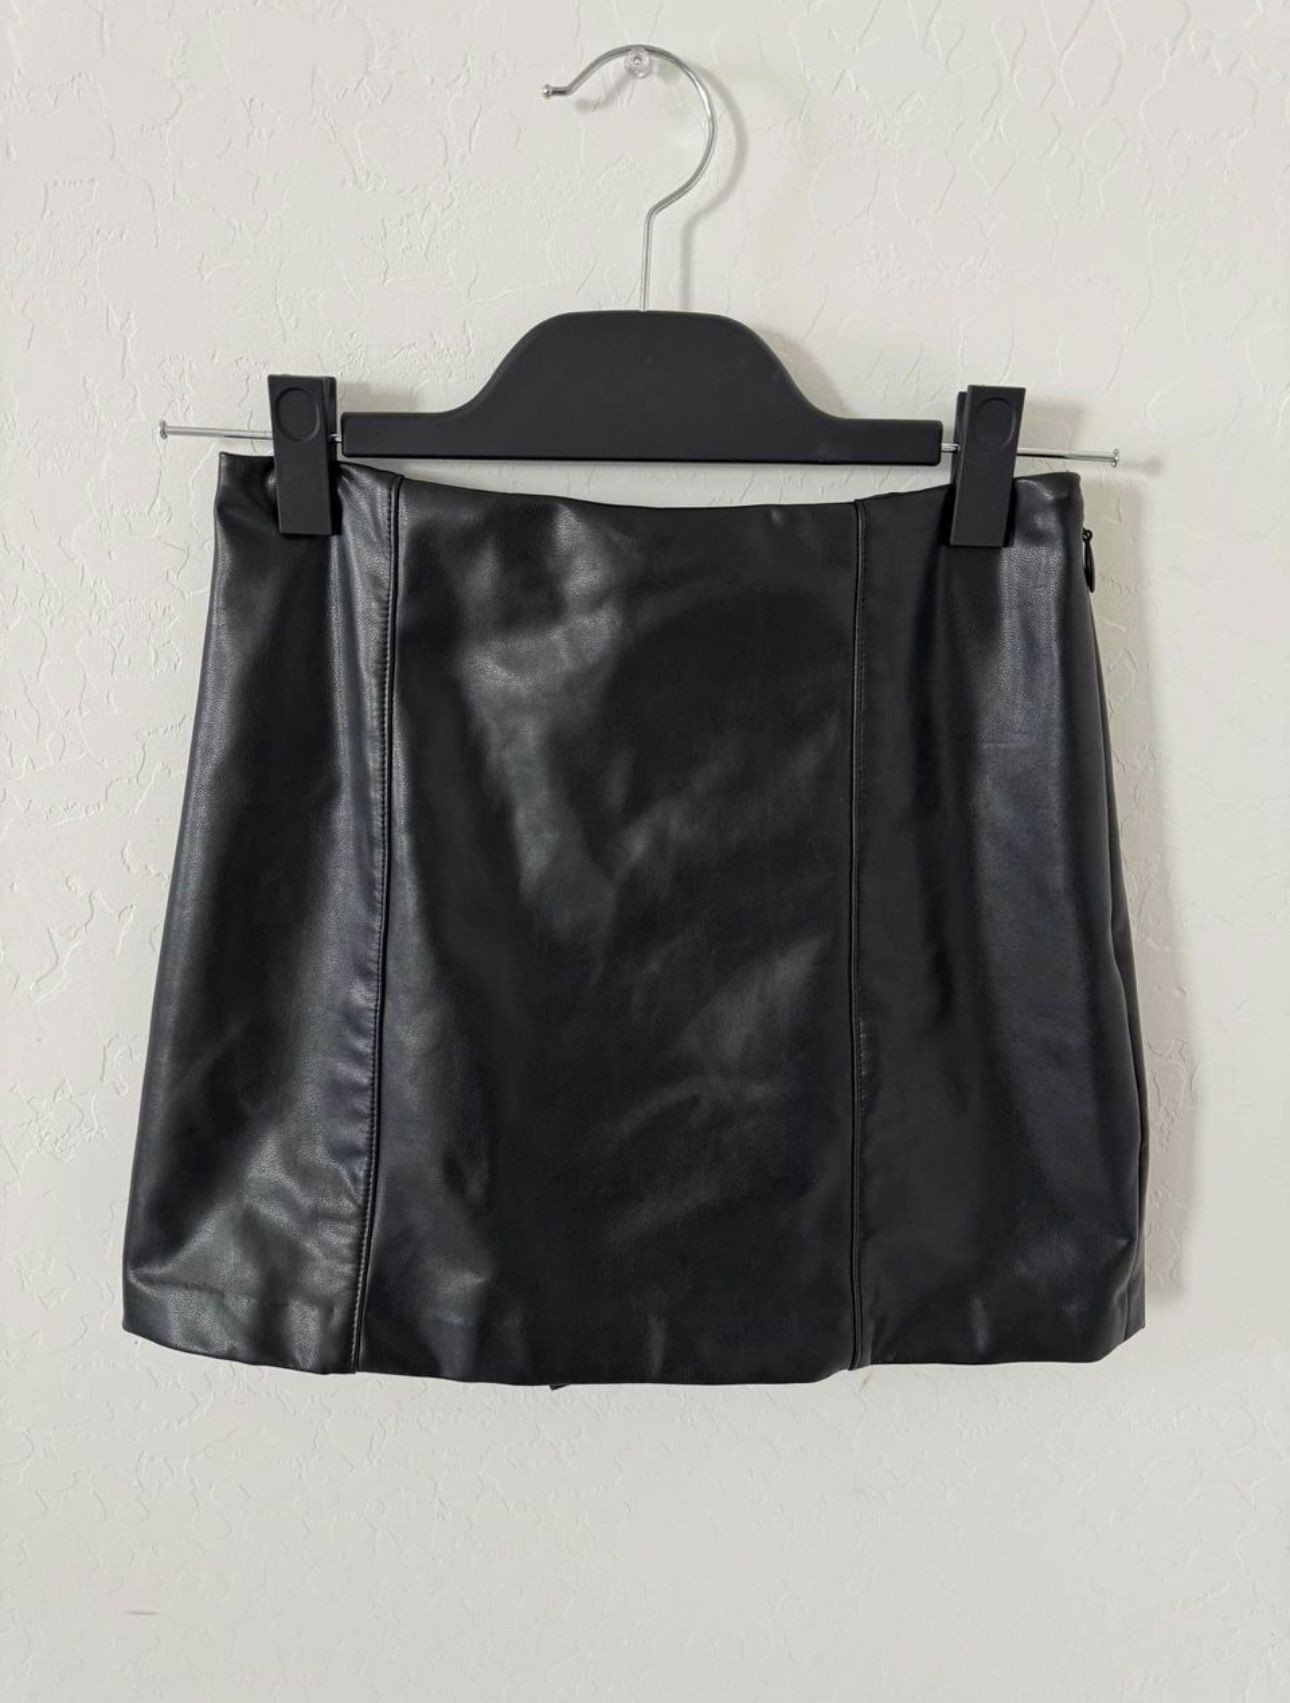 Abercrombie & Fitch Black Faux Leather Skirt